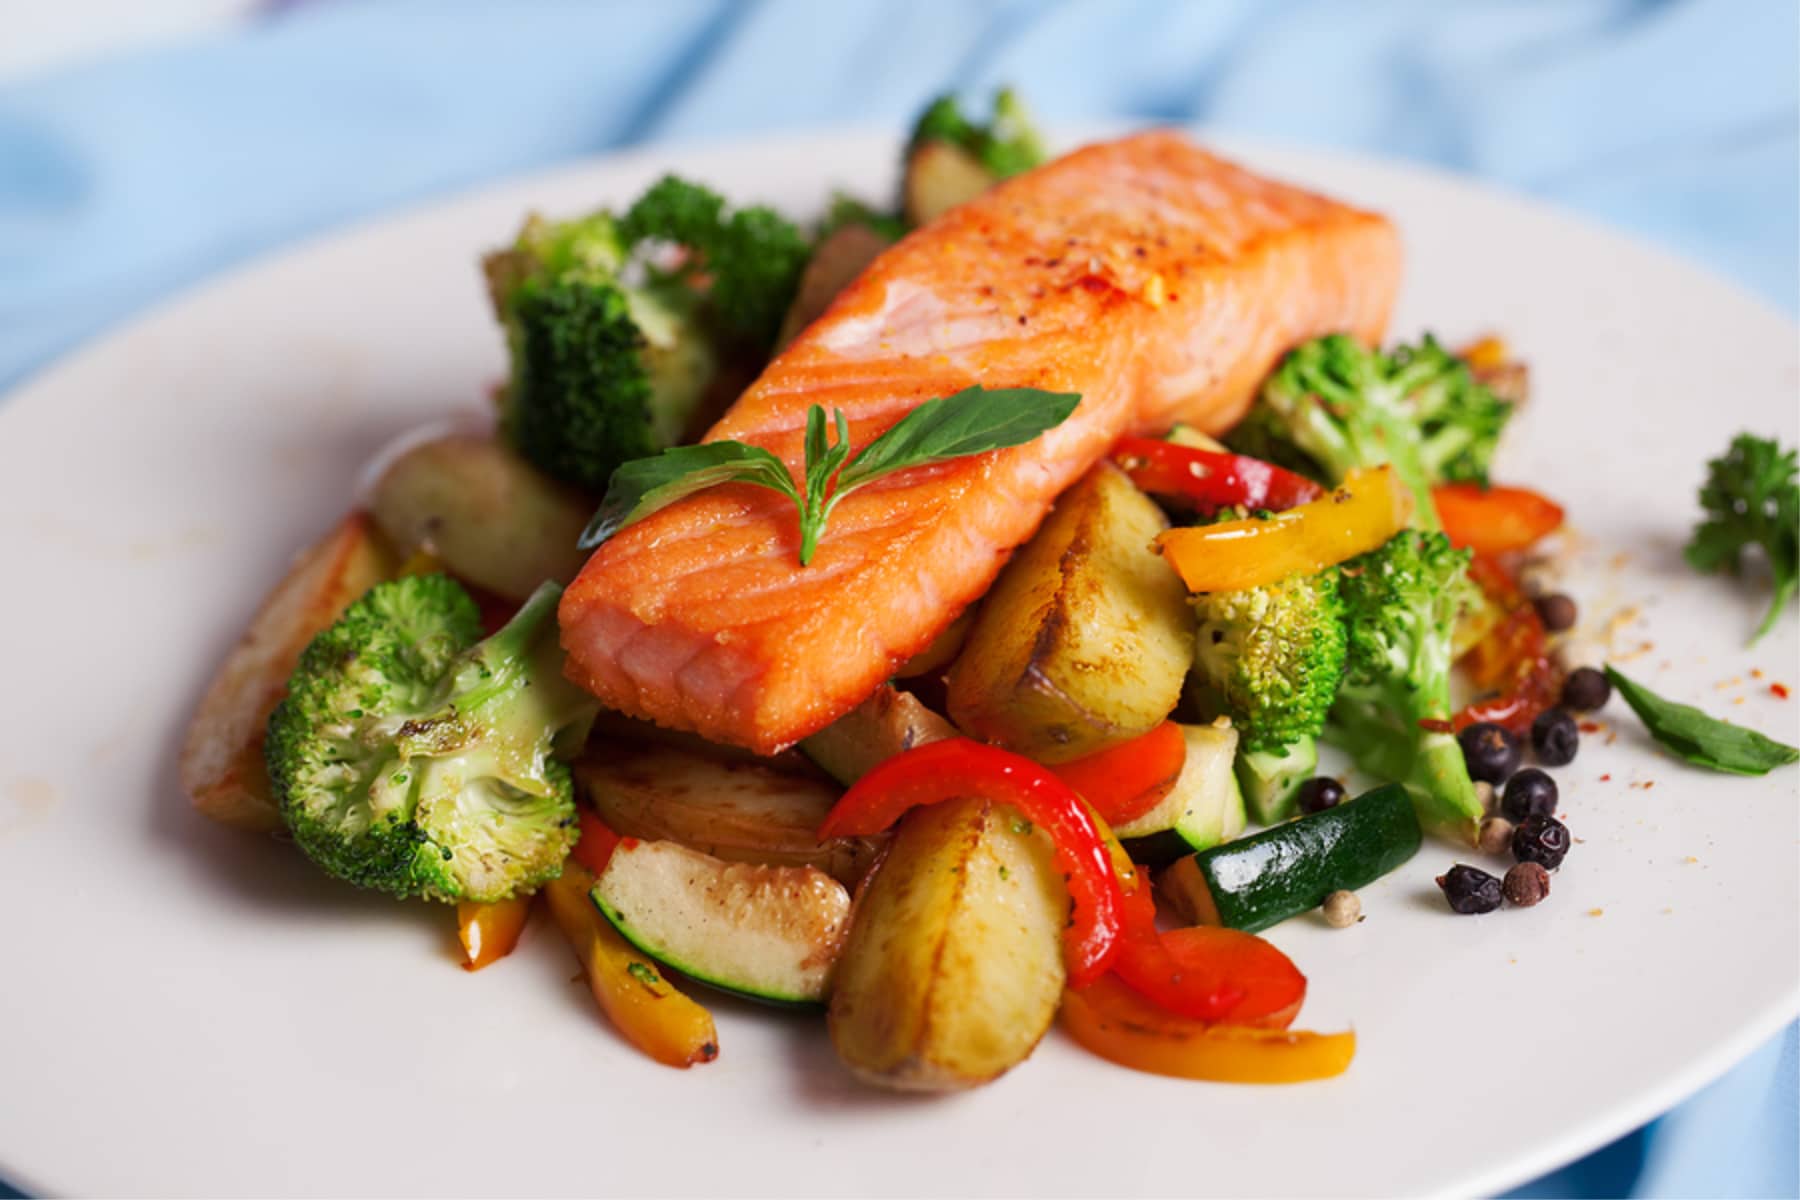 Home Health Care in Braselton GA: The Benefits Of Seafood